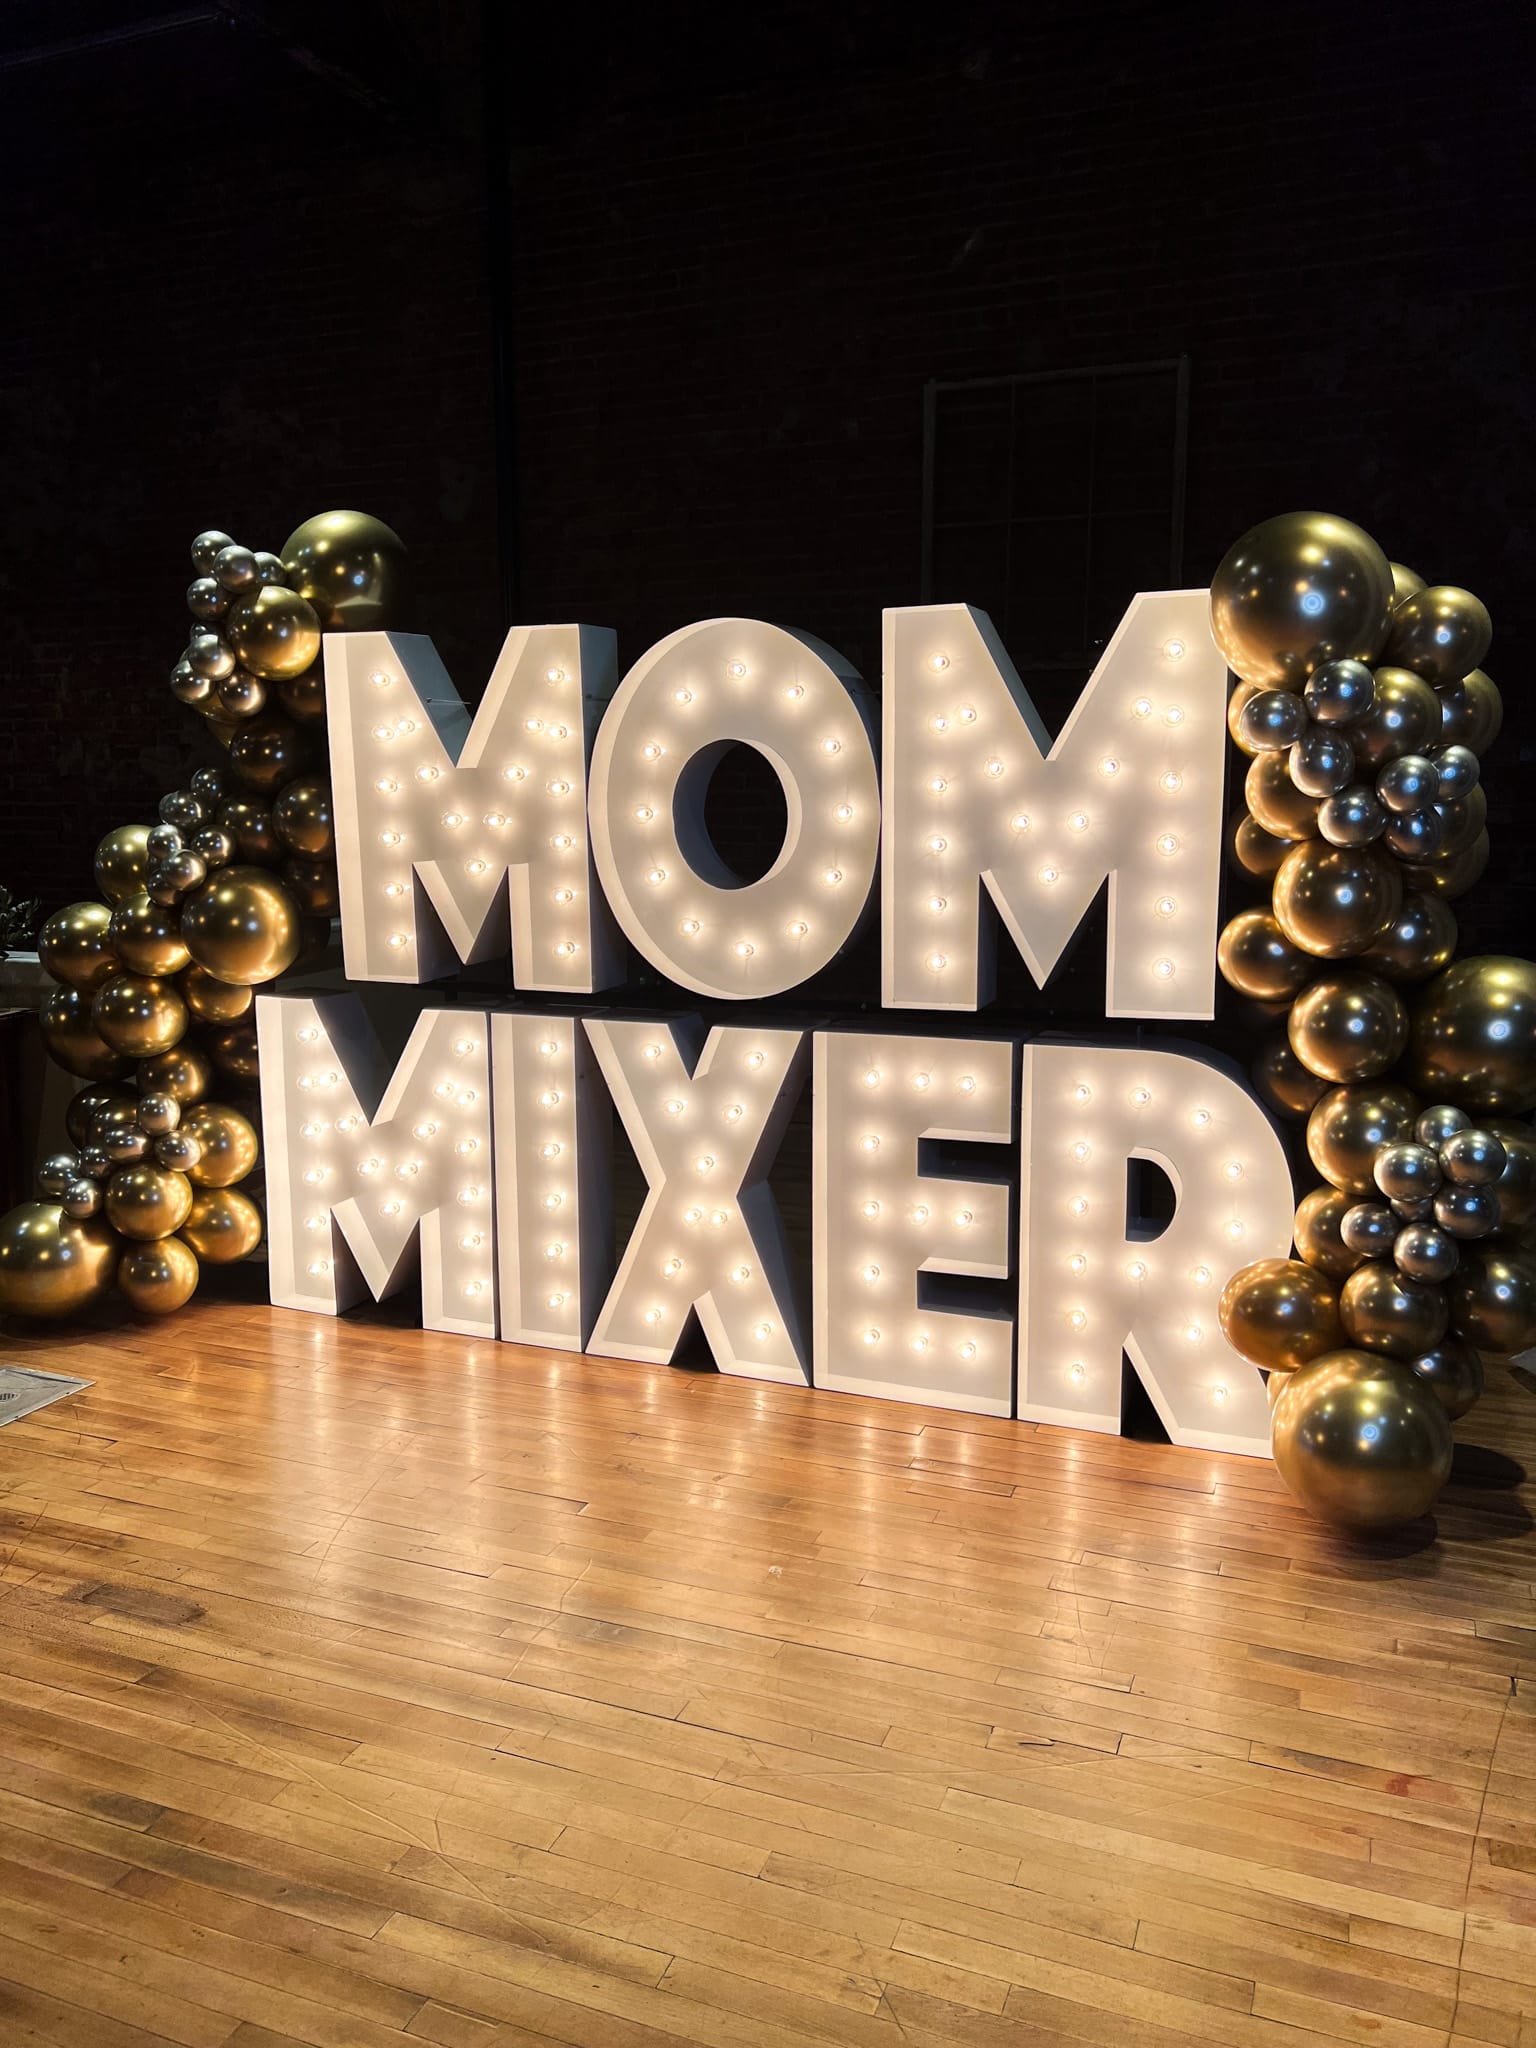 Light Up Letters spelling out "MOM MIXER"